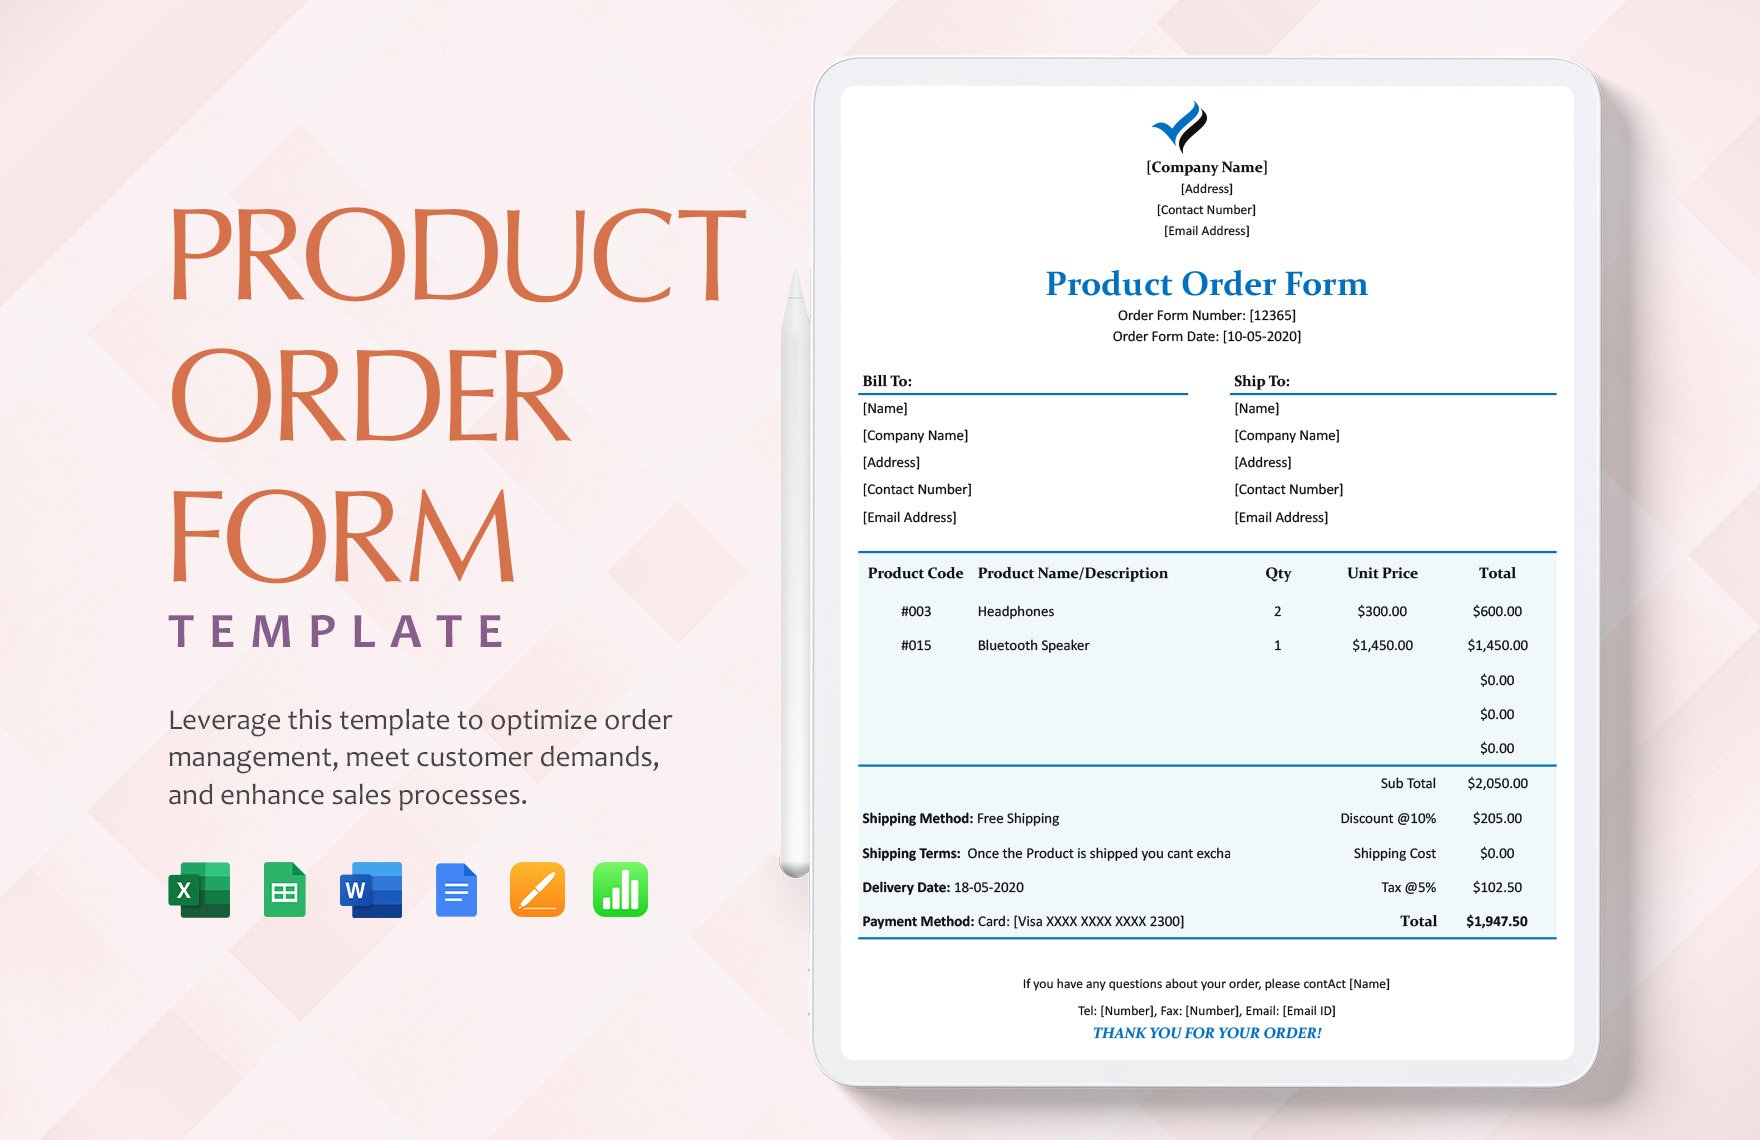 Product Order Form Template in Word, Google Docs, Excel, Google Sheets, Apple Pages, Apple Numbers